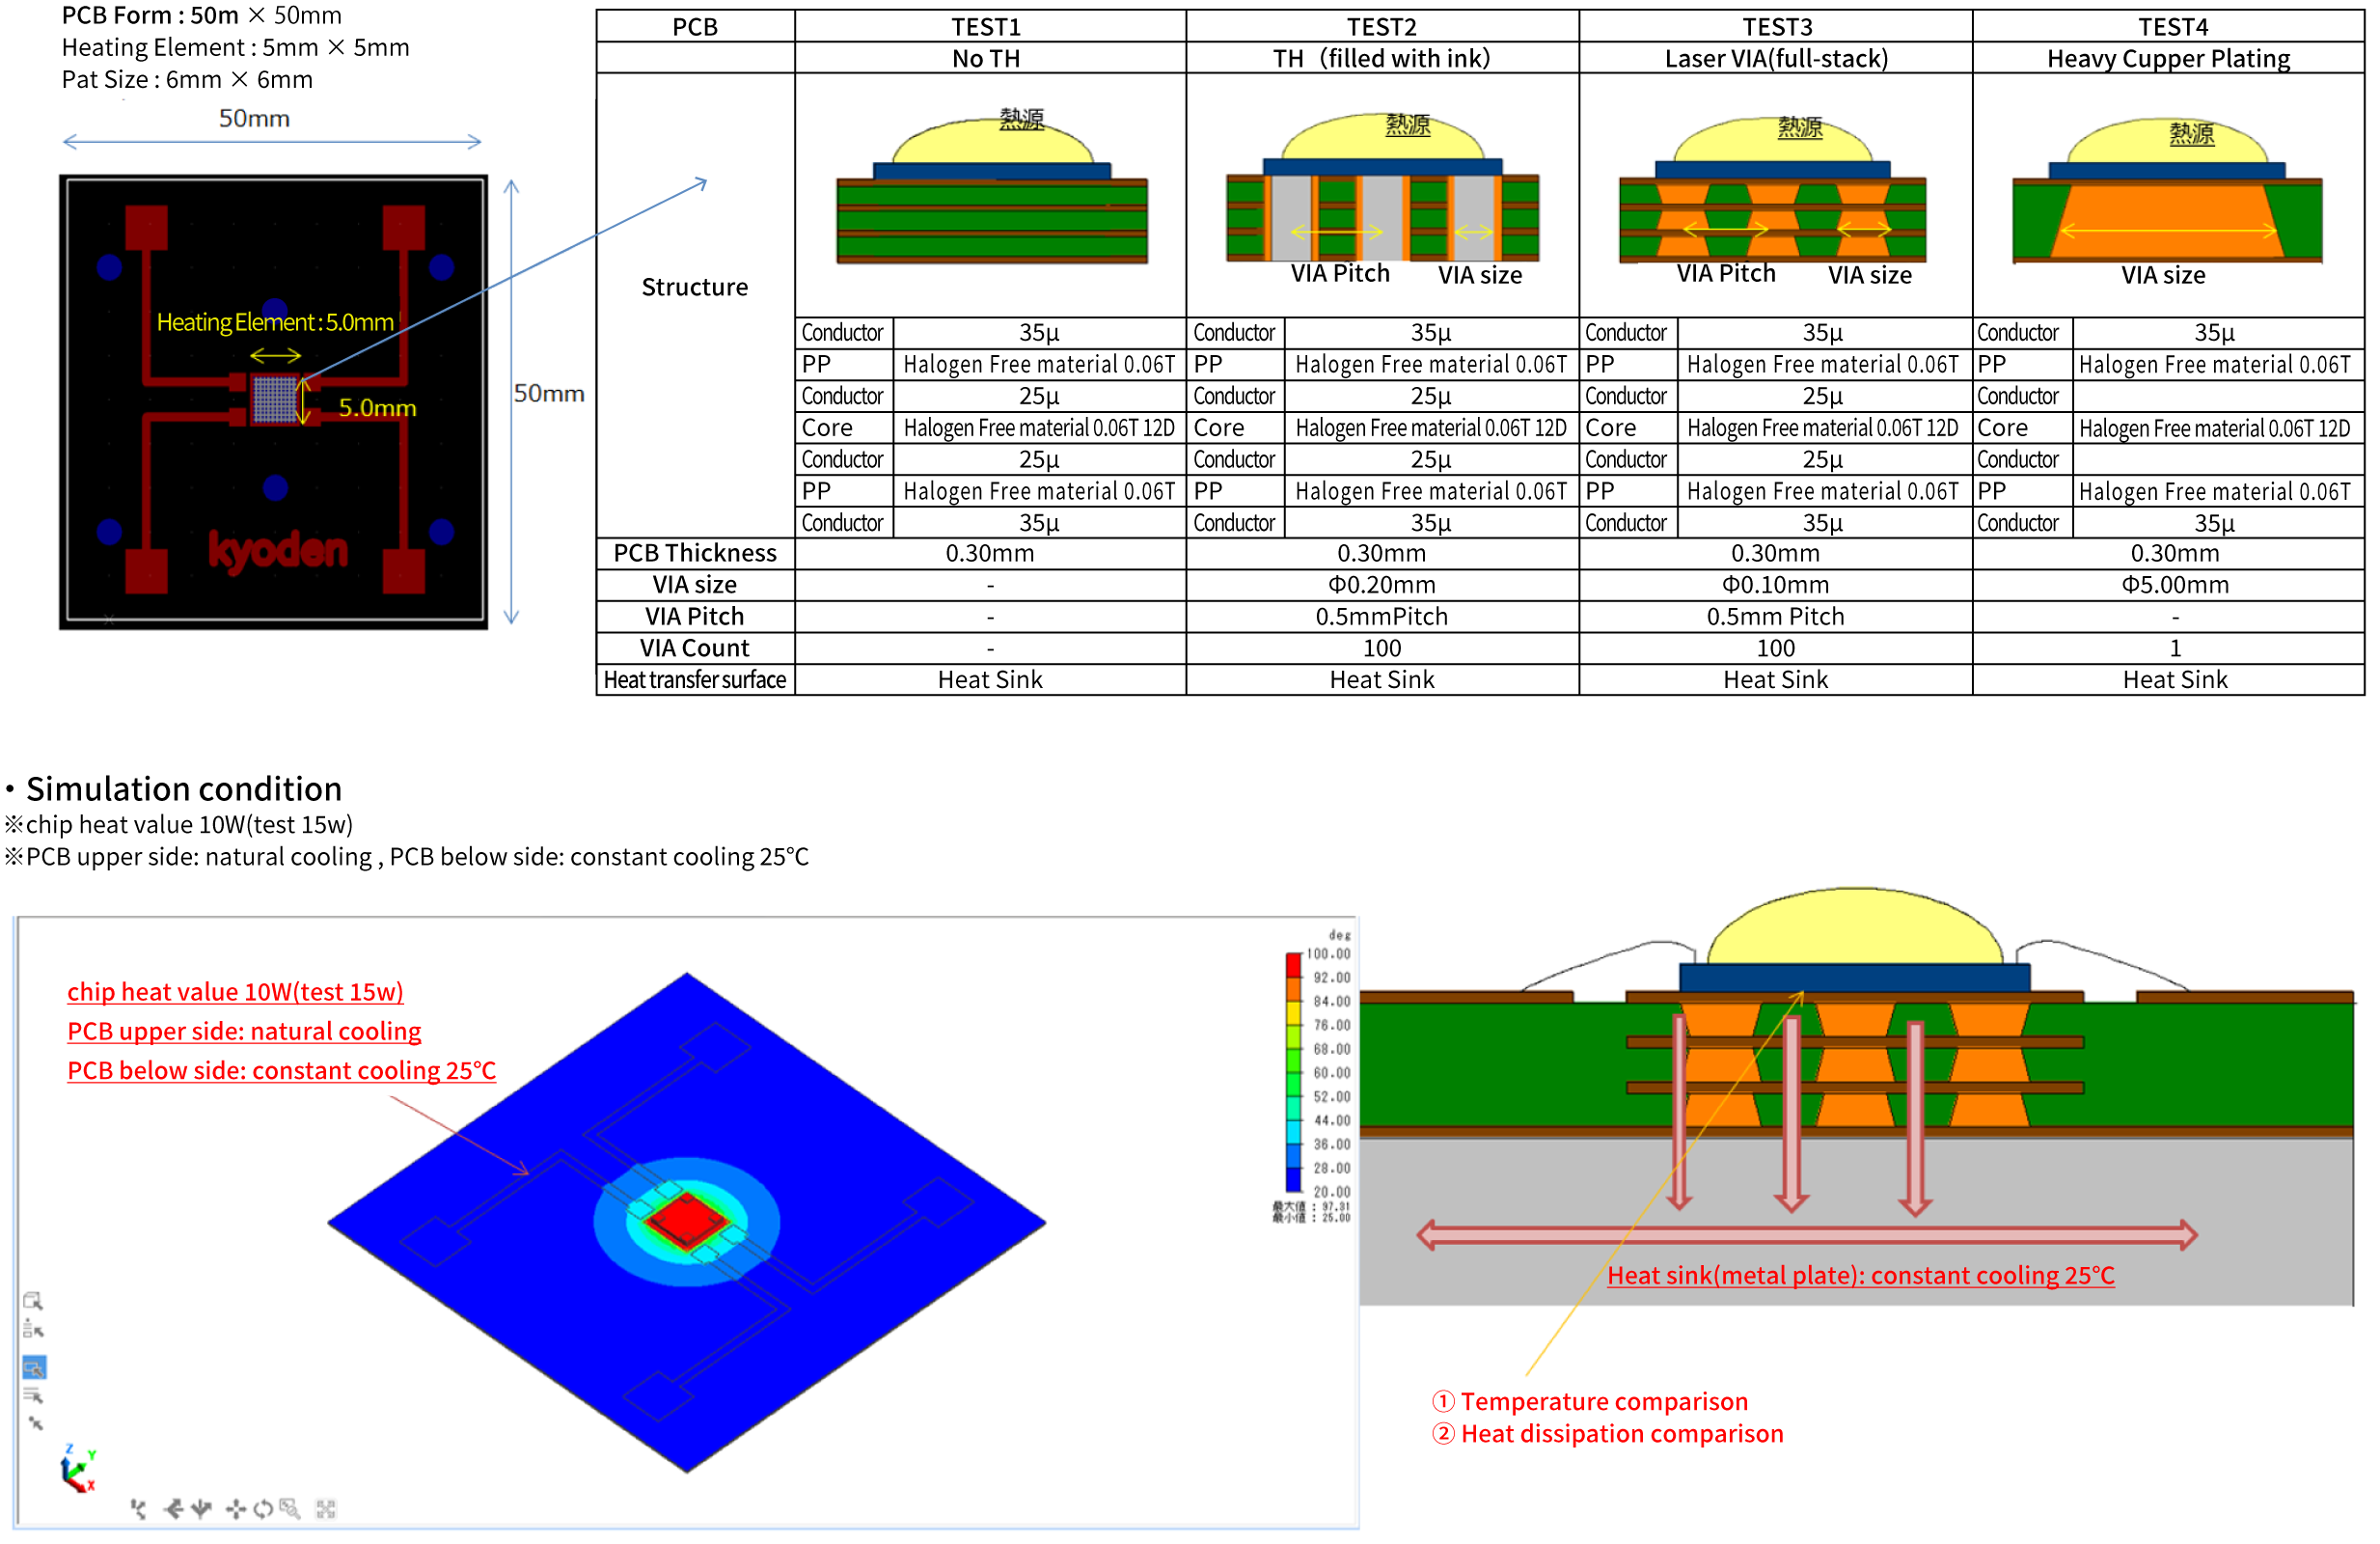 Models of PCB Structures (Condition 4 shows a thick copper plating PCB)